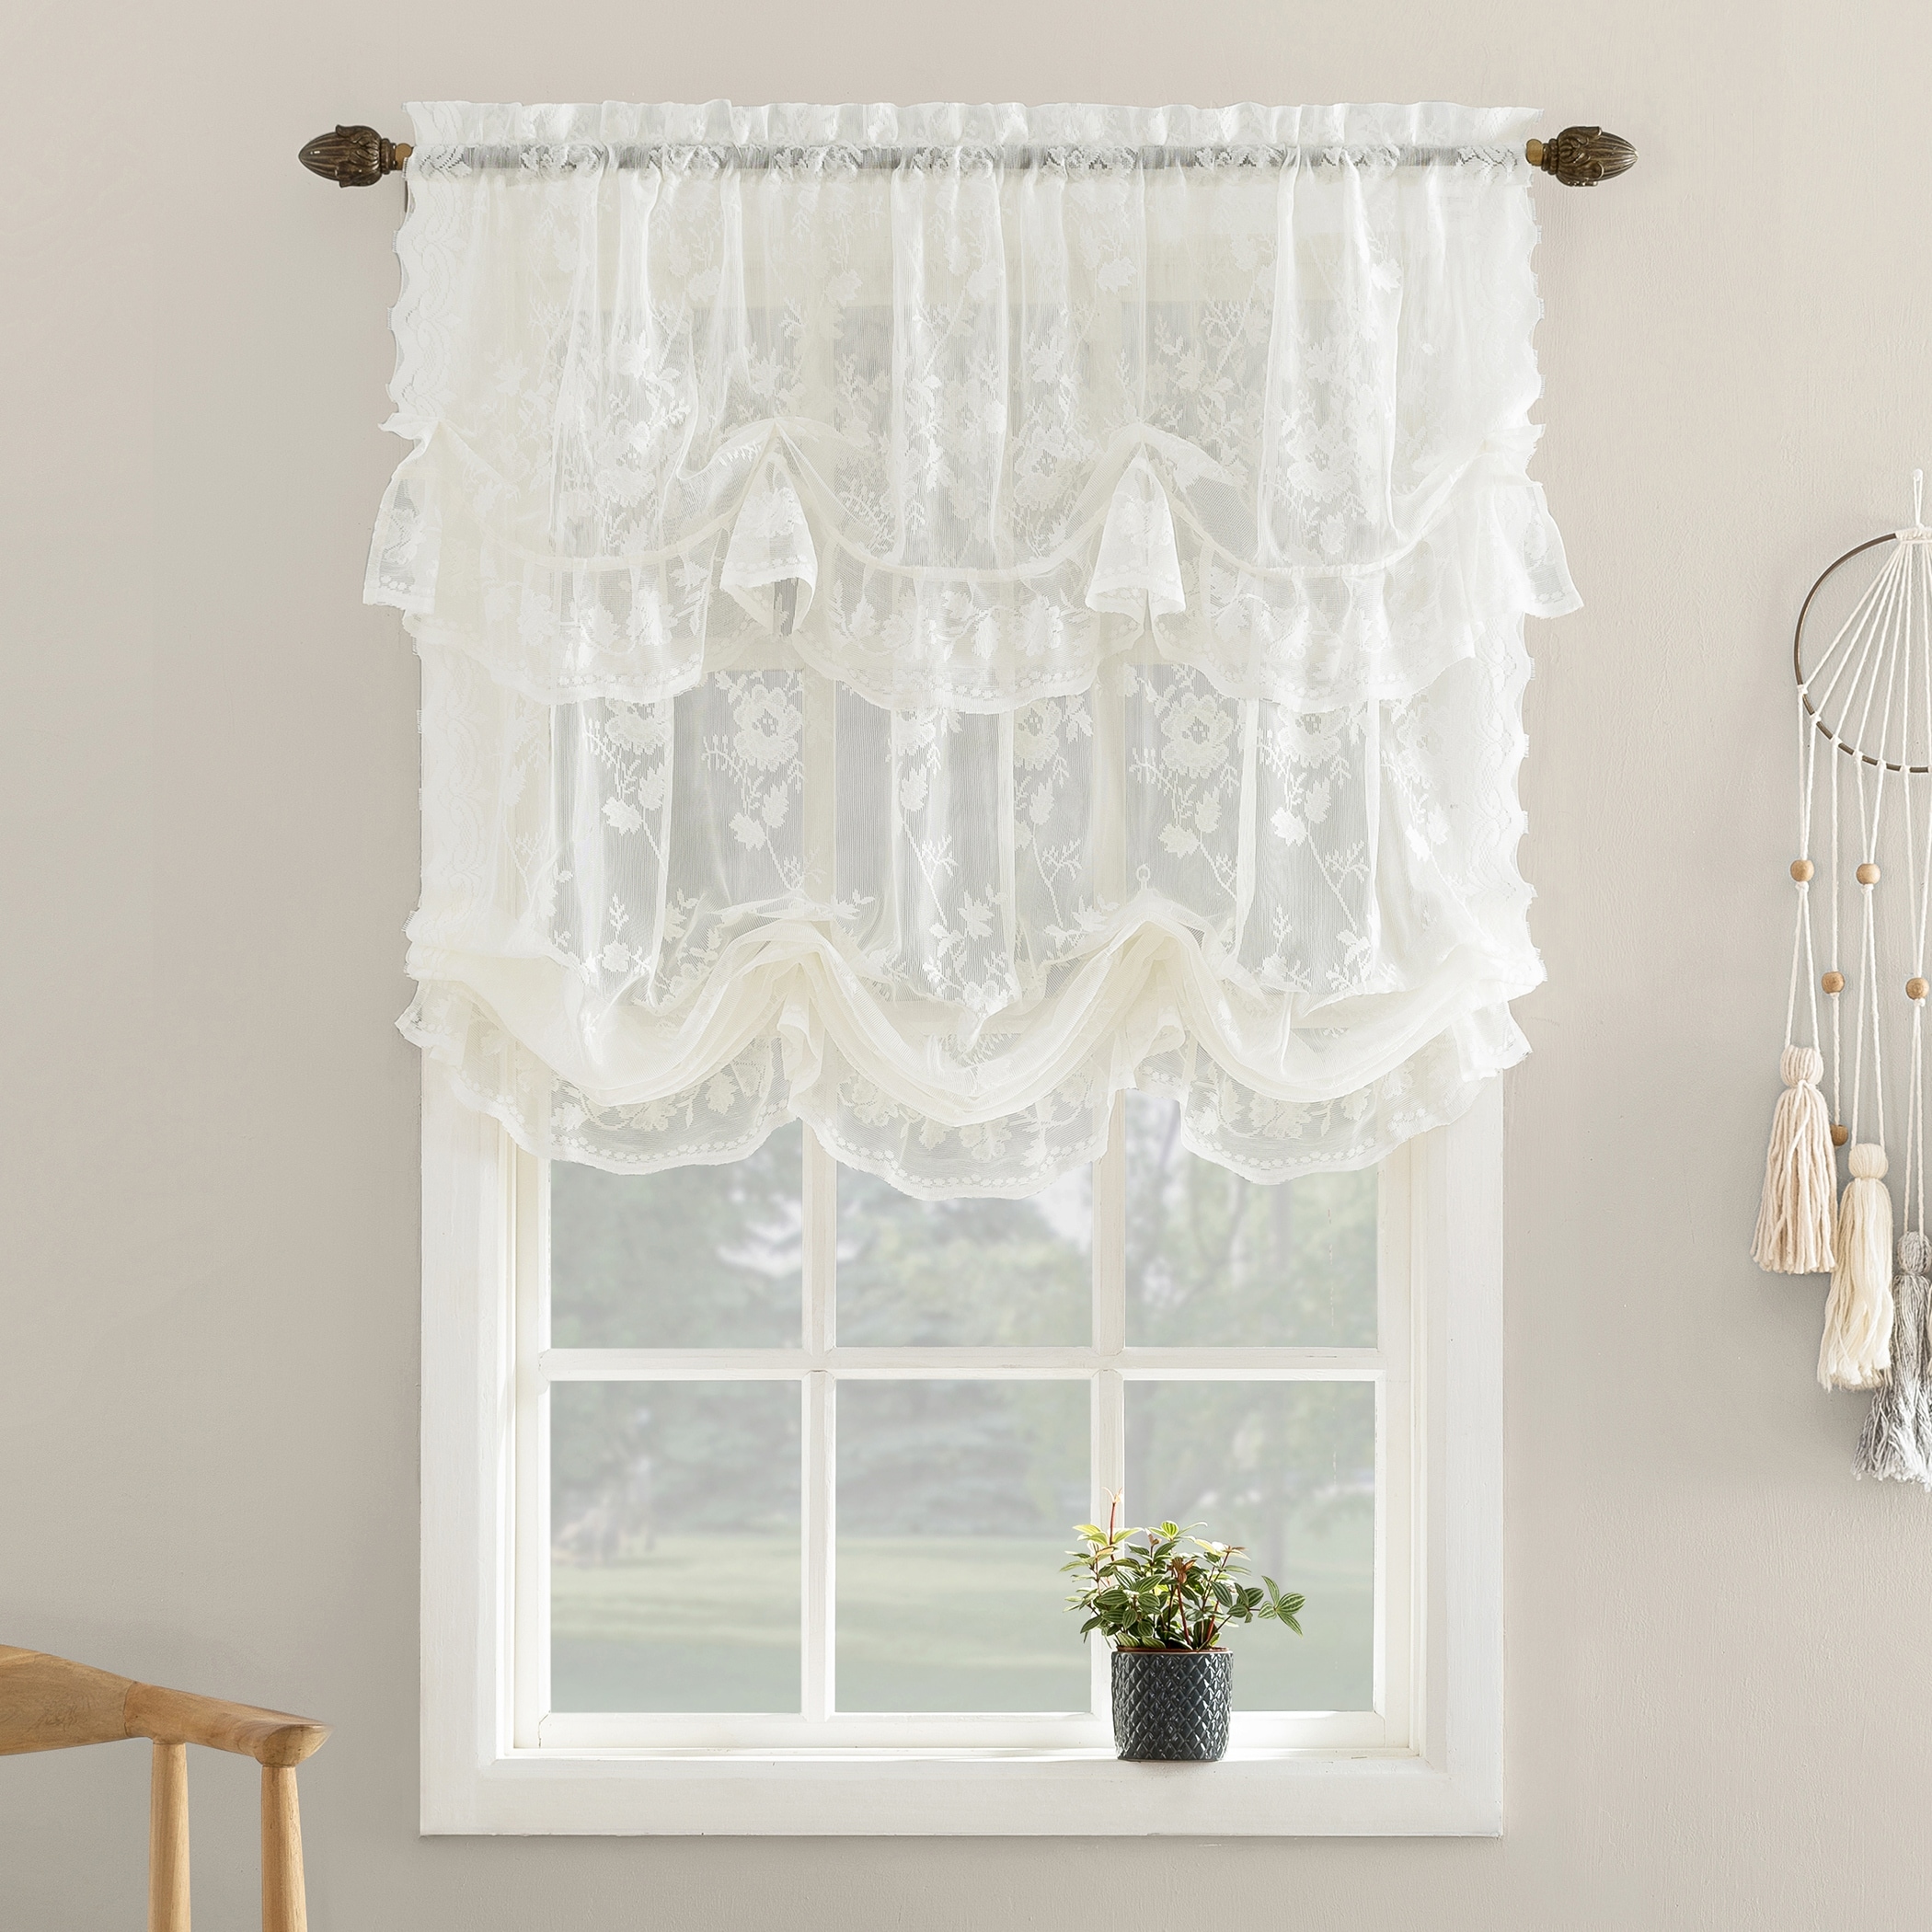 White Lace Embroidered Tie-Up Balloon Shade Curtain Sheer Voile Valance 1 Panel 